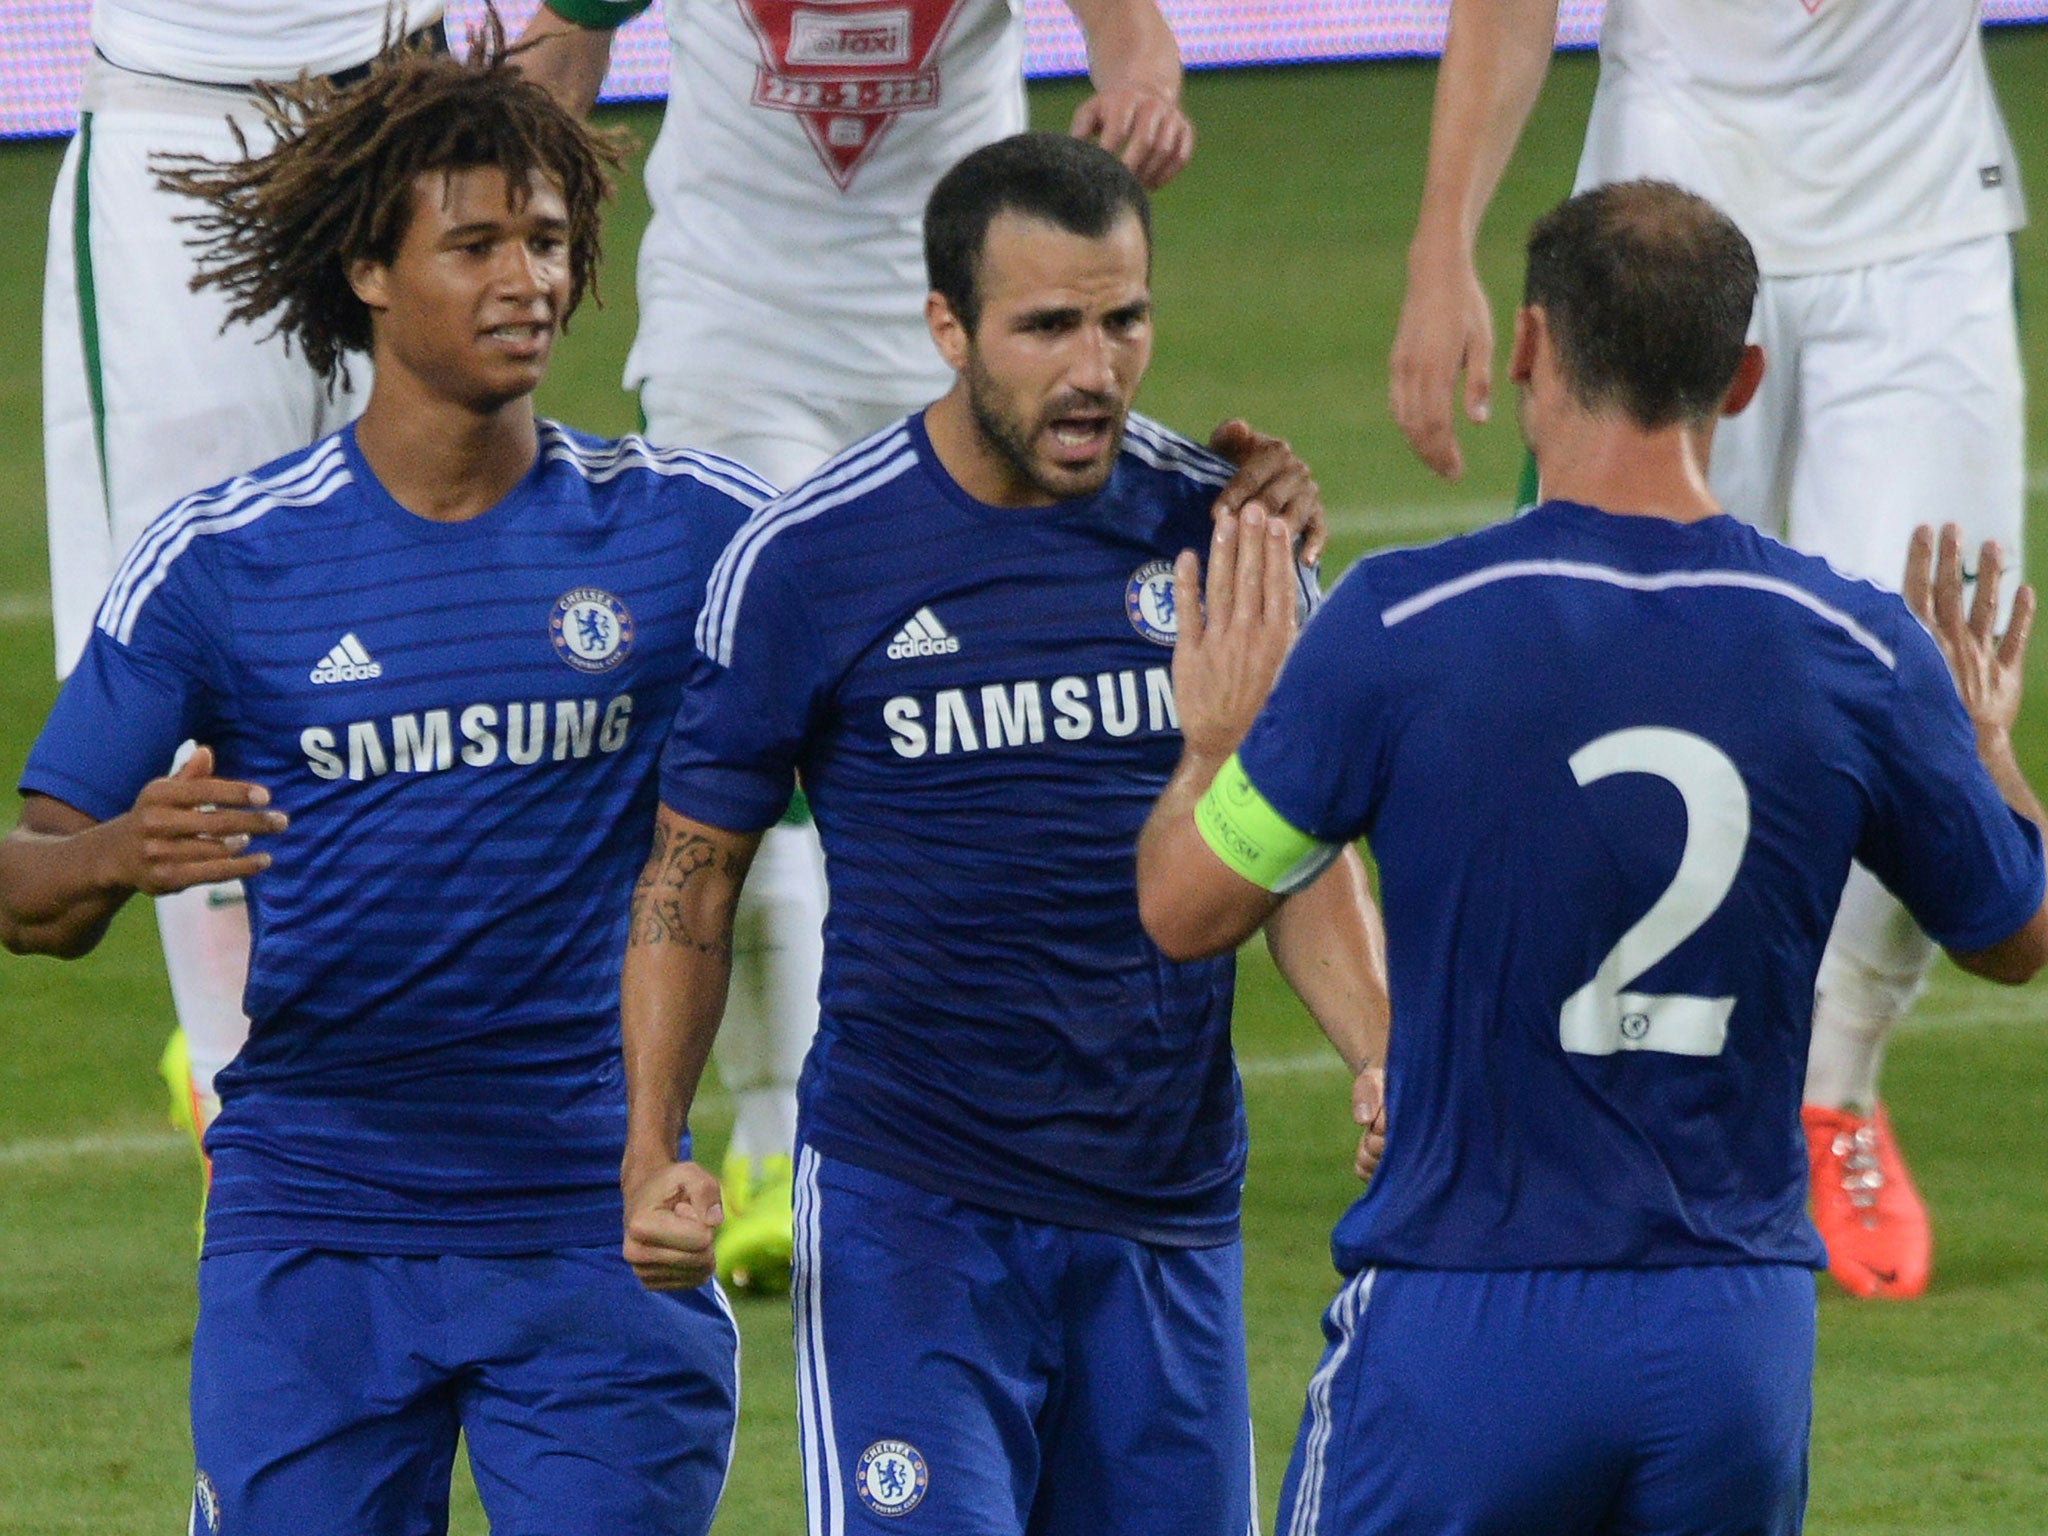 Frank Lampard is the past and Cesc Fabregas (centre) the future of Chelsea, says Jose Mourinho